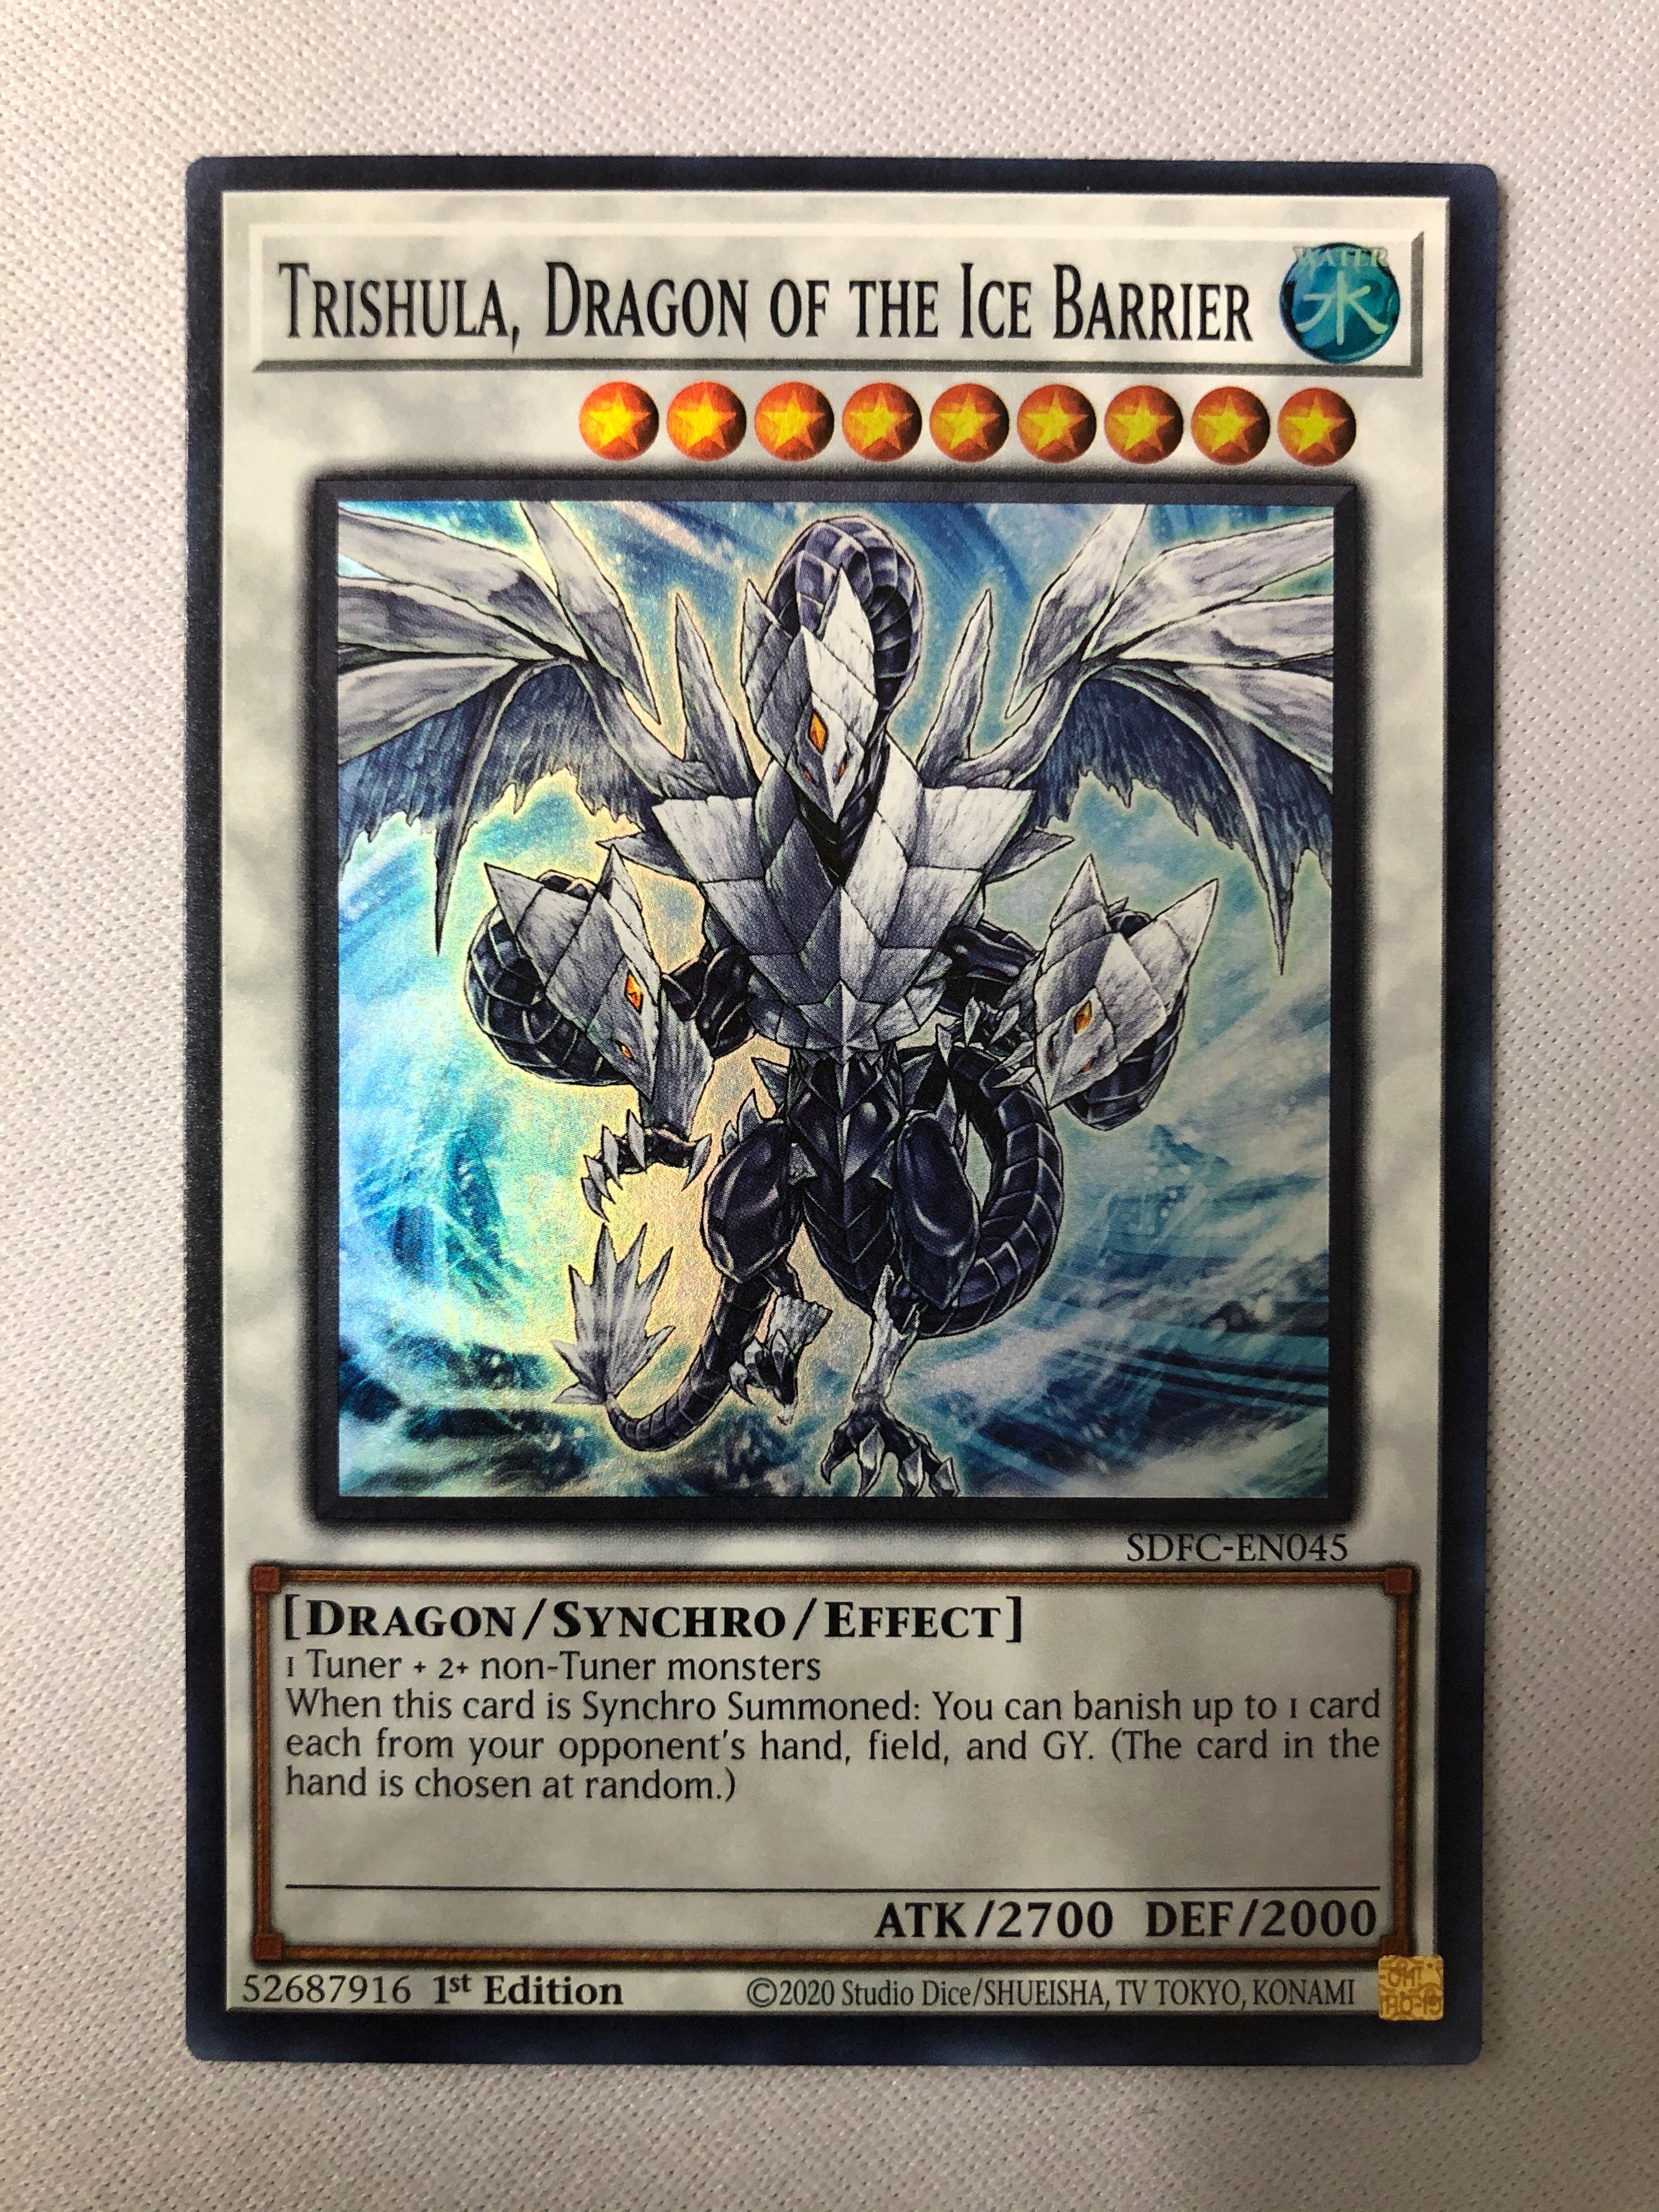 Dragon of the Ice Barrier SDFC-EN045 Super Rare 1st Edition Near Mint Trishula